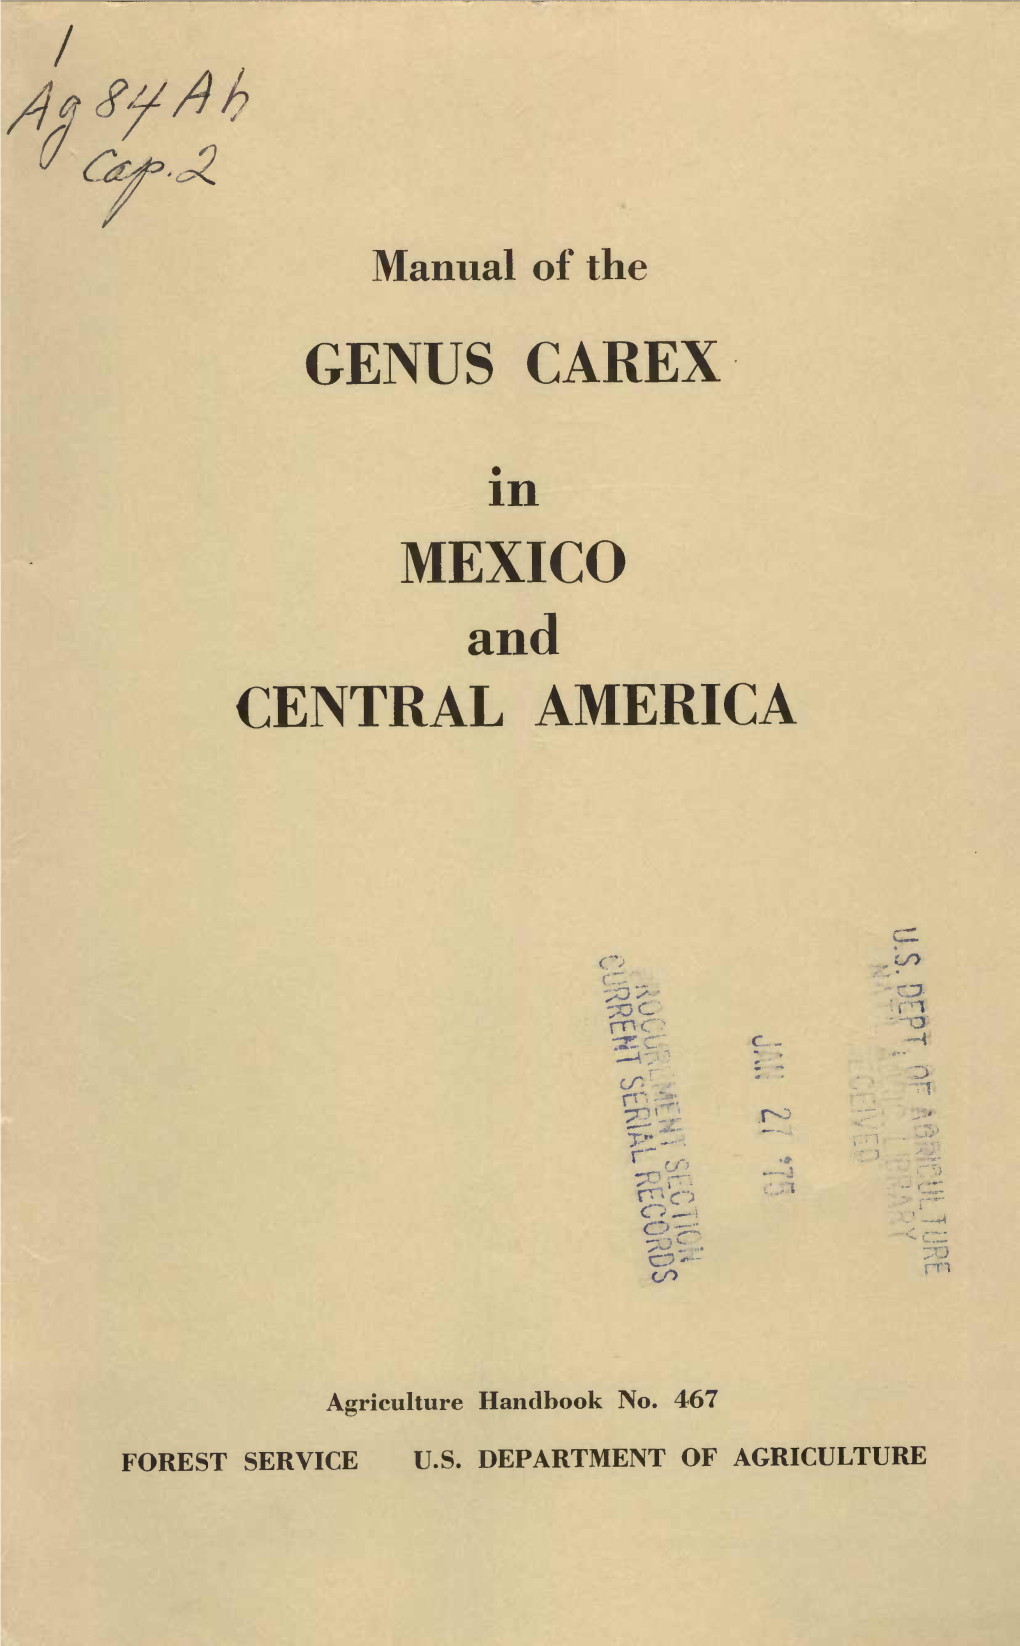 GENUS CAREX MEXICO and CENTRAL AMERICA